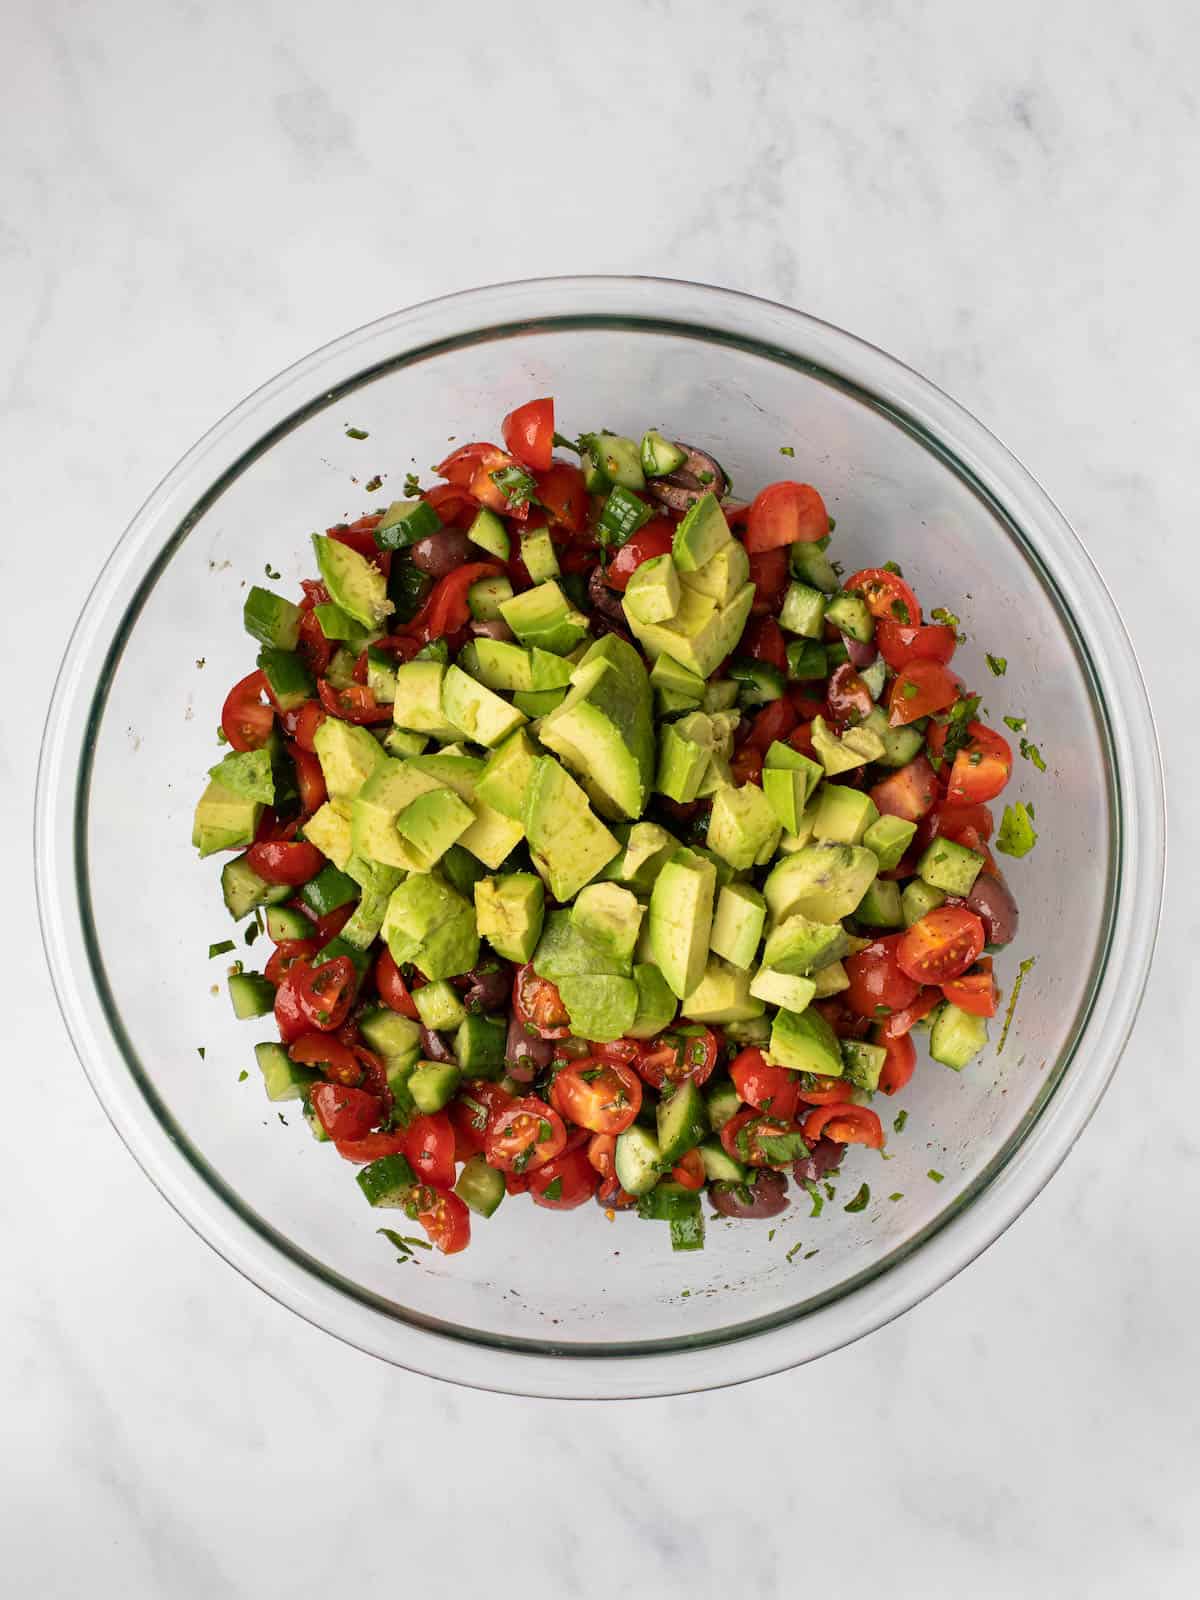 Adding diced avocado to a chopped cucumber and tomato salad.